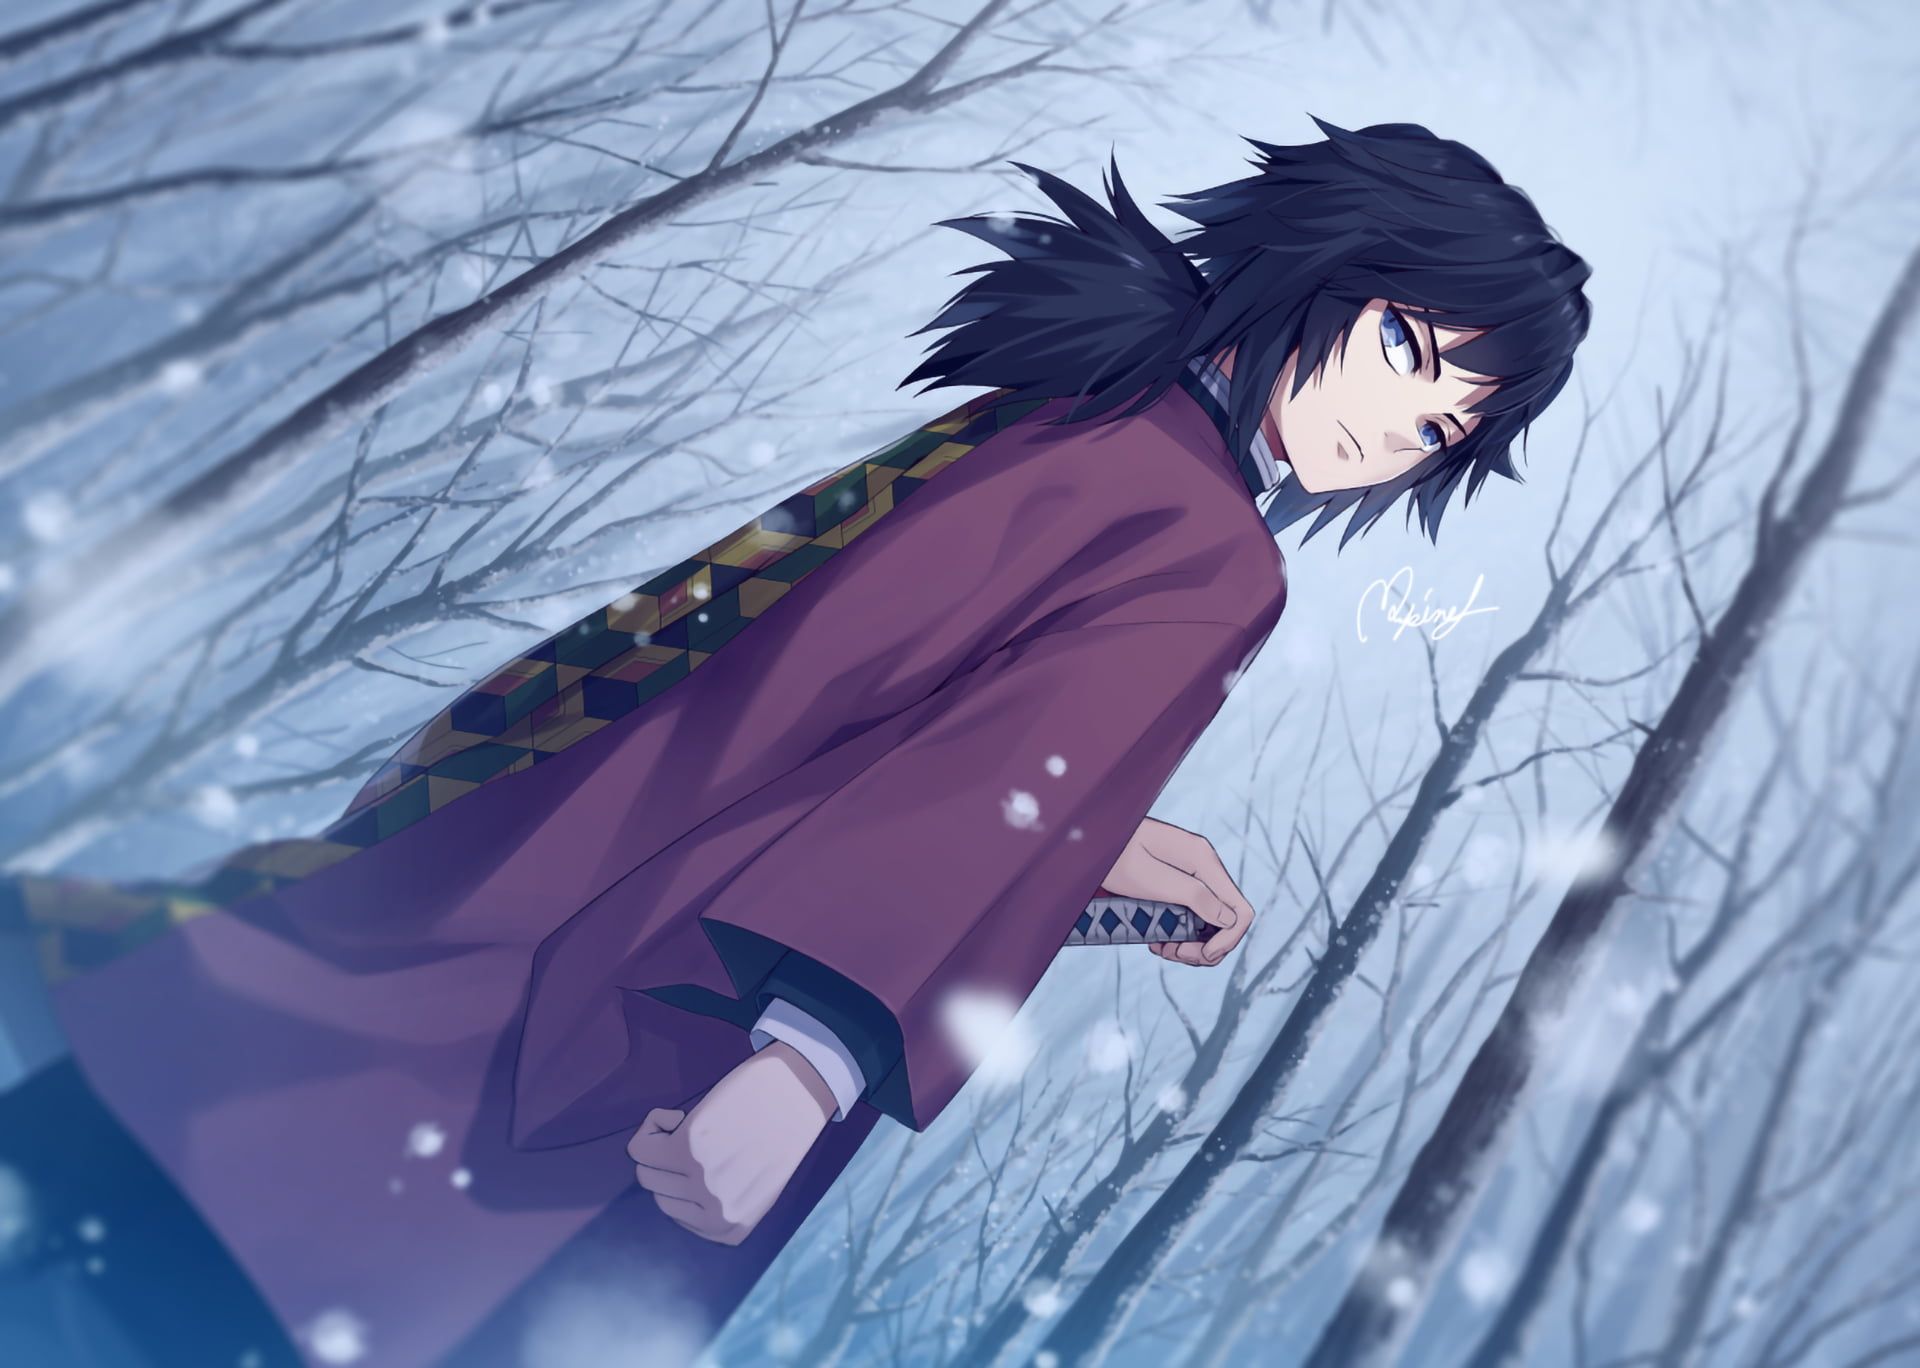 An anime character with a sword in a snowy forest - Demon Slayer